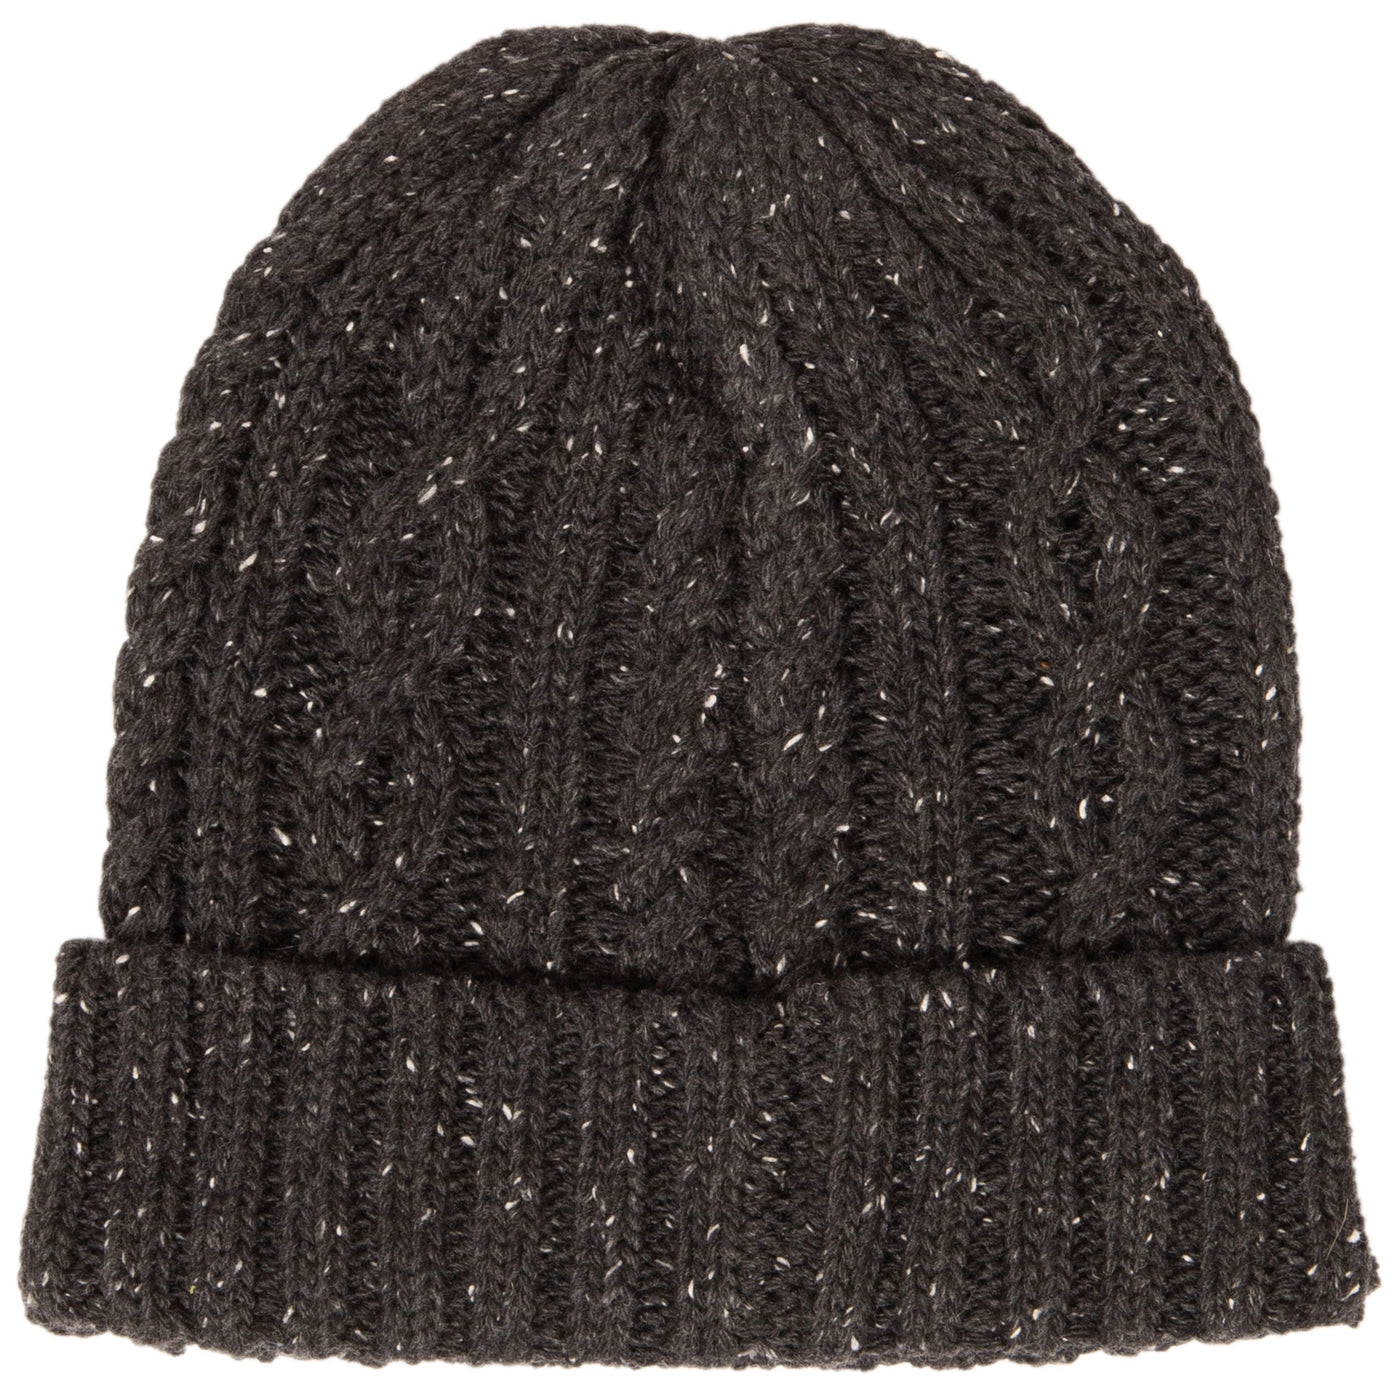 Men's Wool Blend Cable Knit Cuffed Beanie – San Diego Hat Company